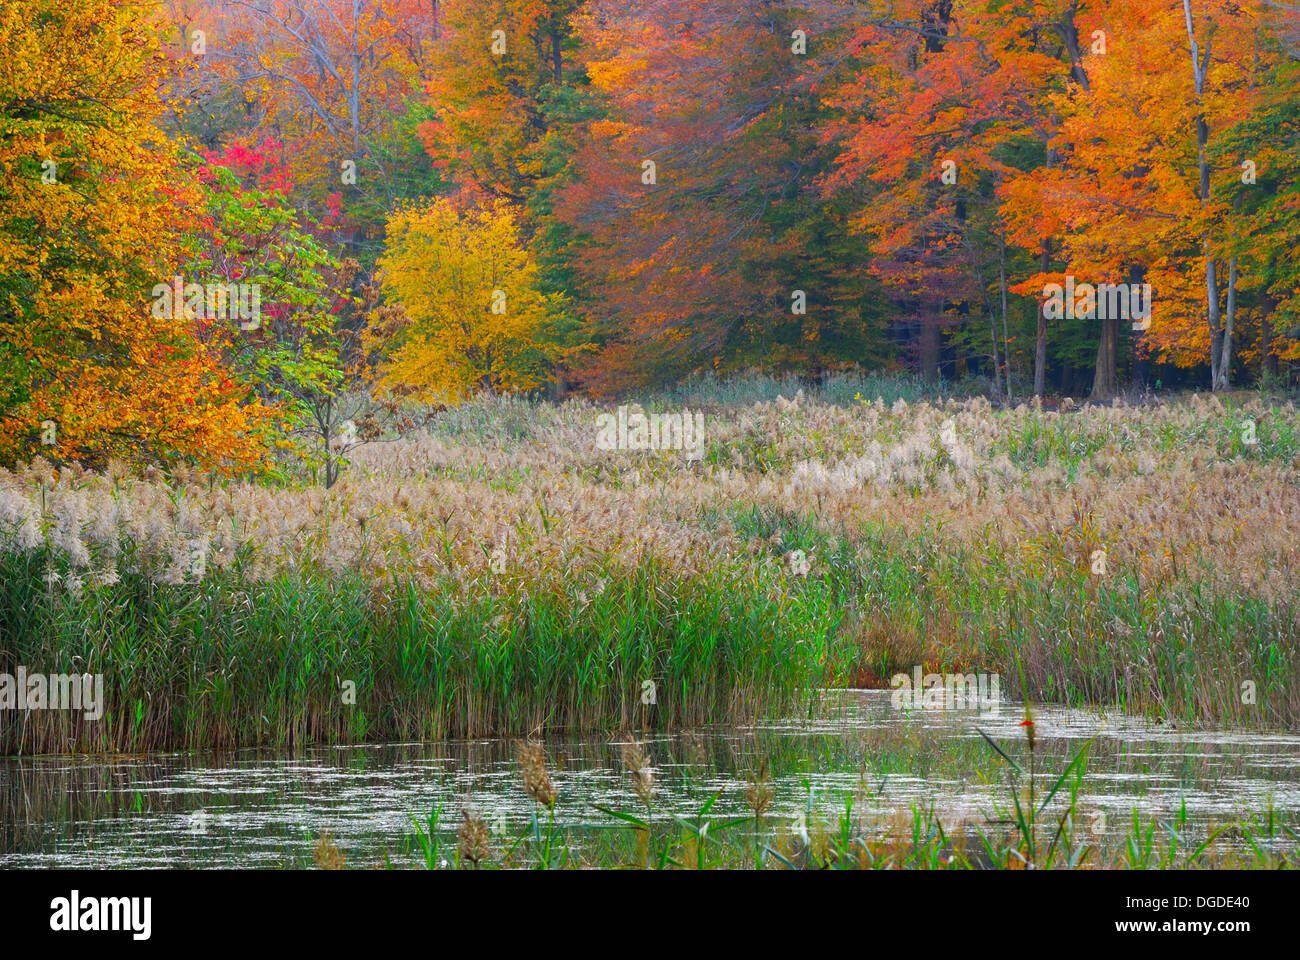 A autumn Swamp Landscape in the early fall season. Stock Photo